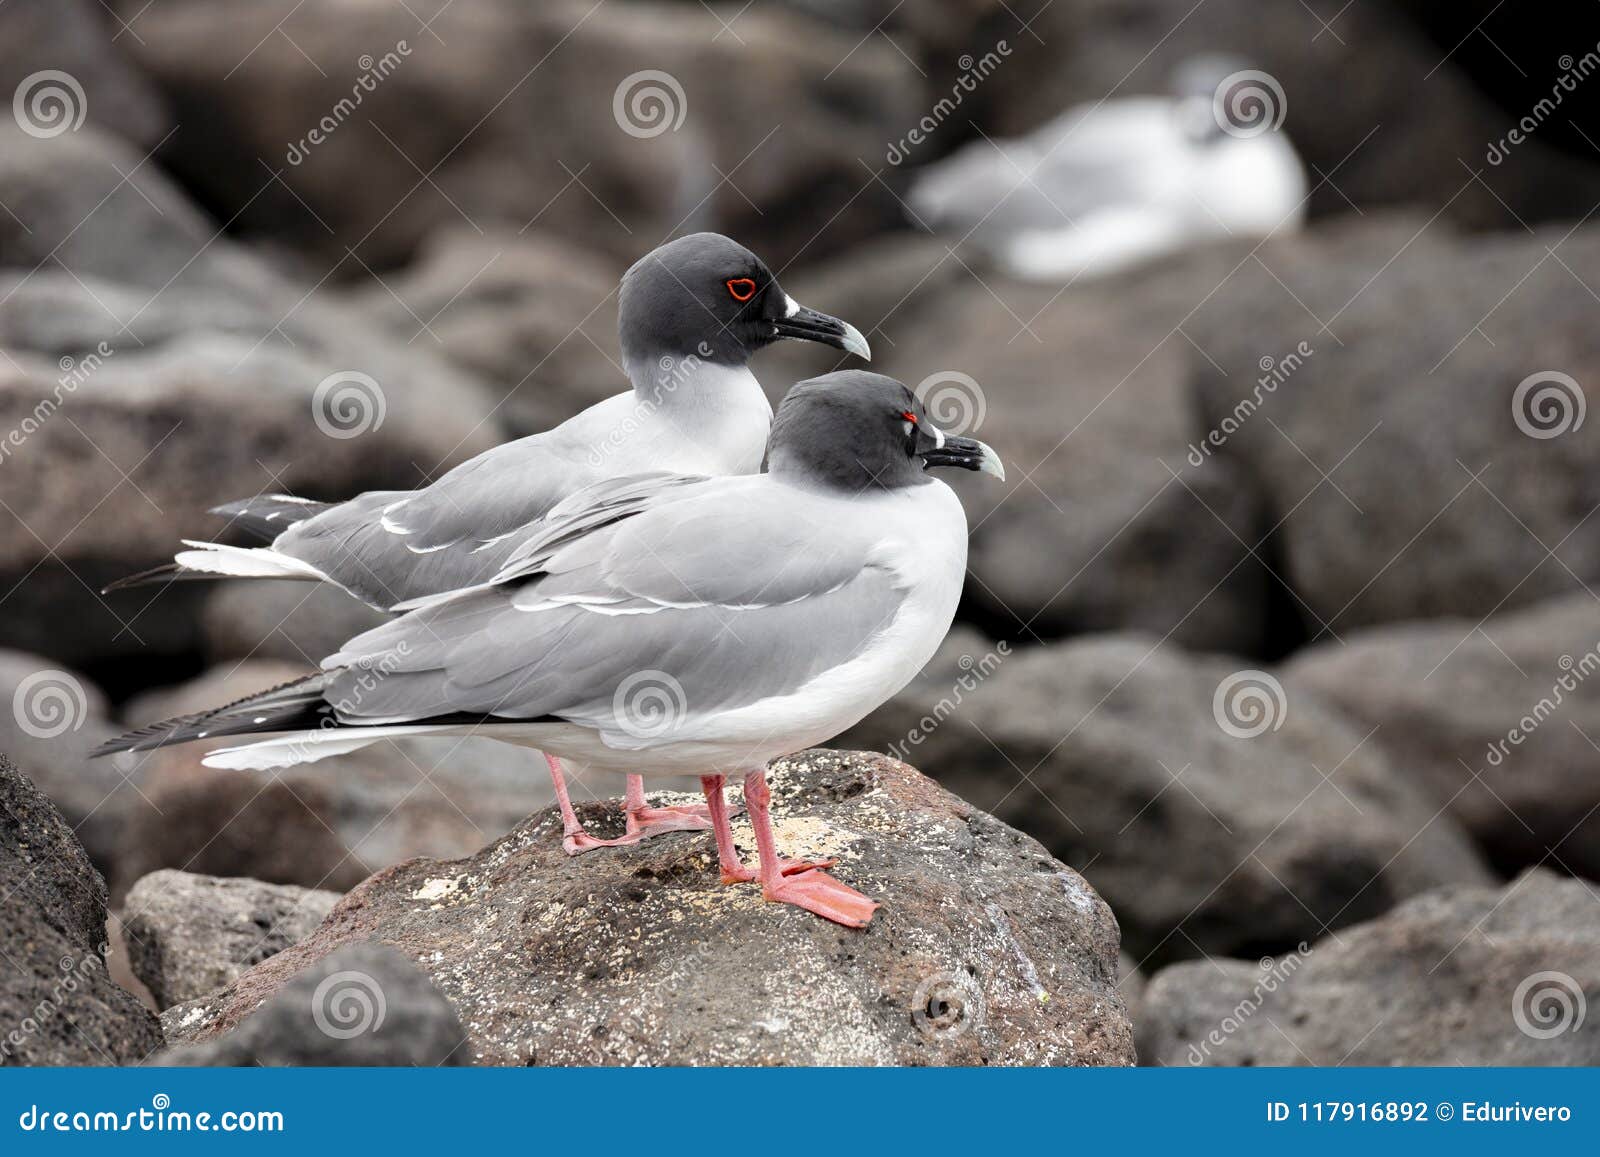 swallow-tailed gull in galapagos islands